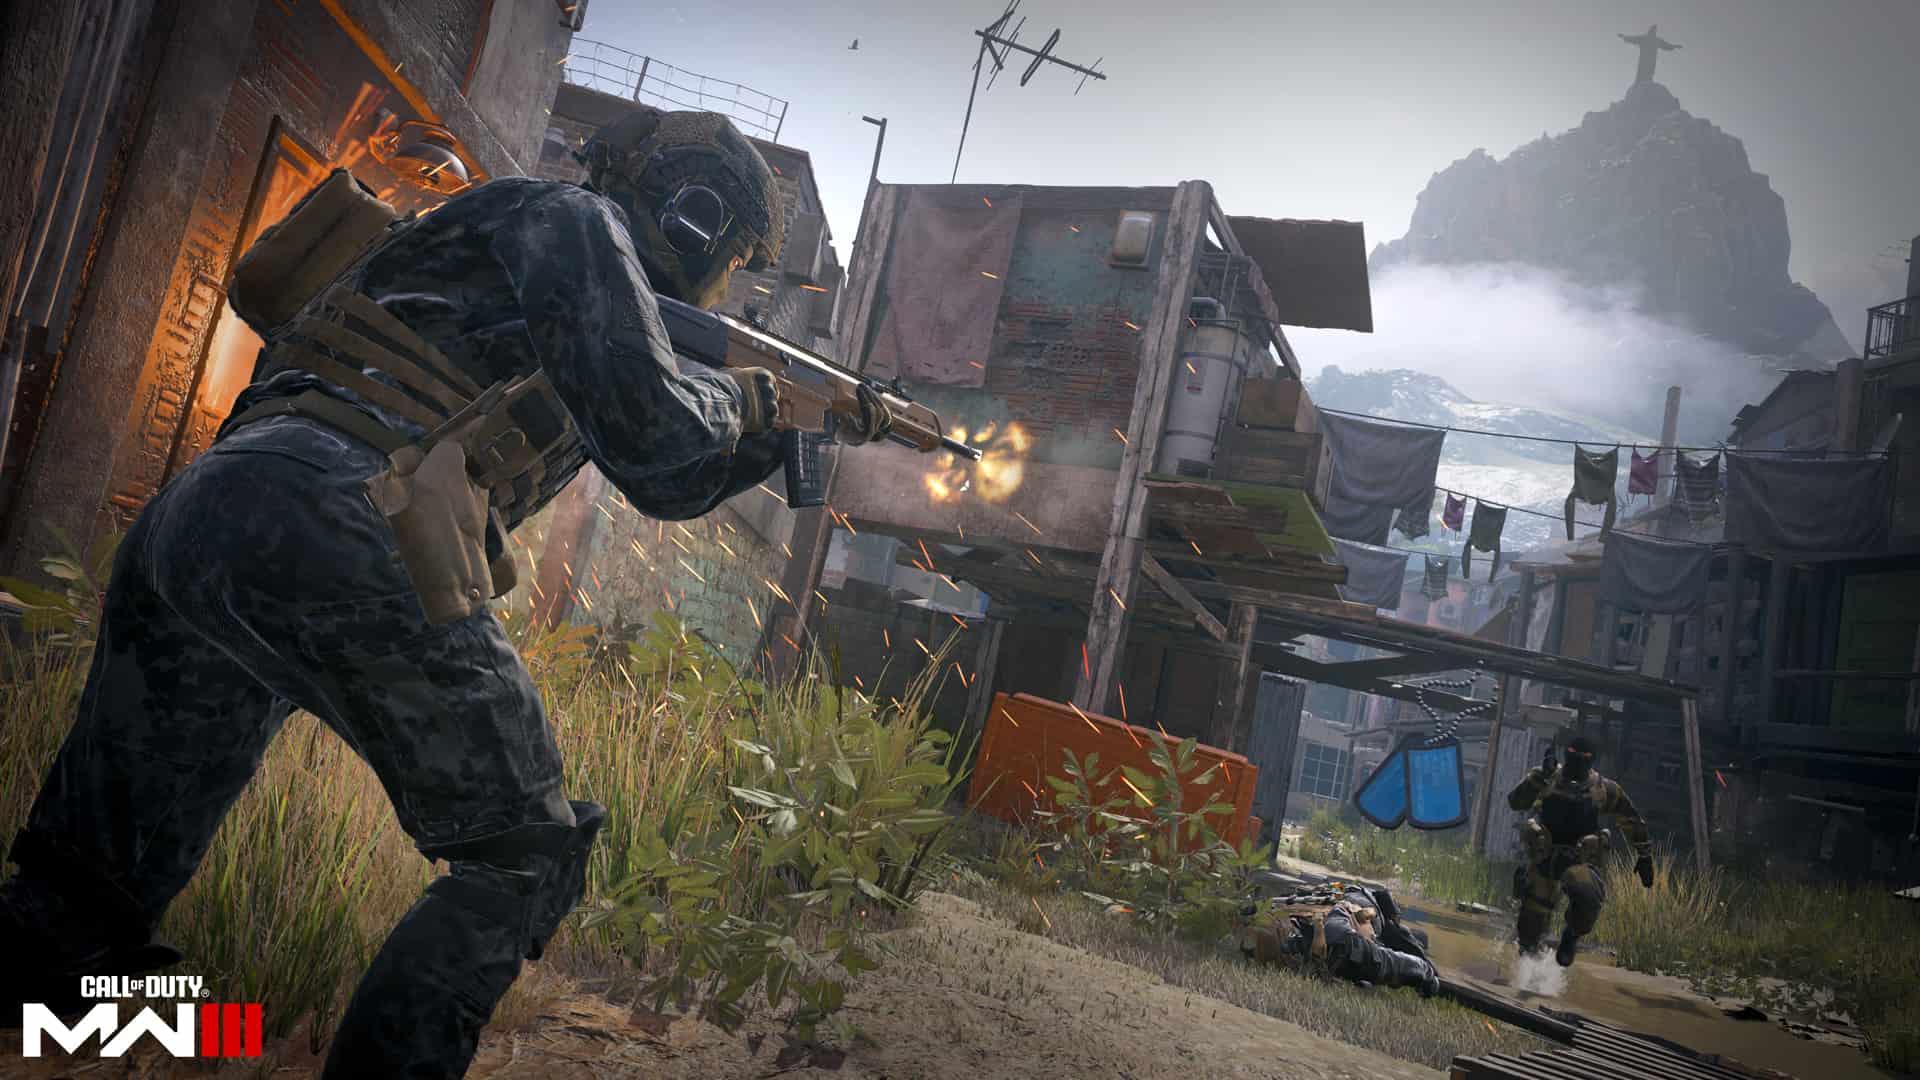 MW3 game modes: One player searches for dog tags of a killed enemy